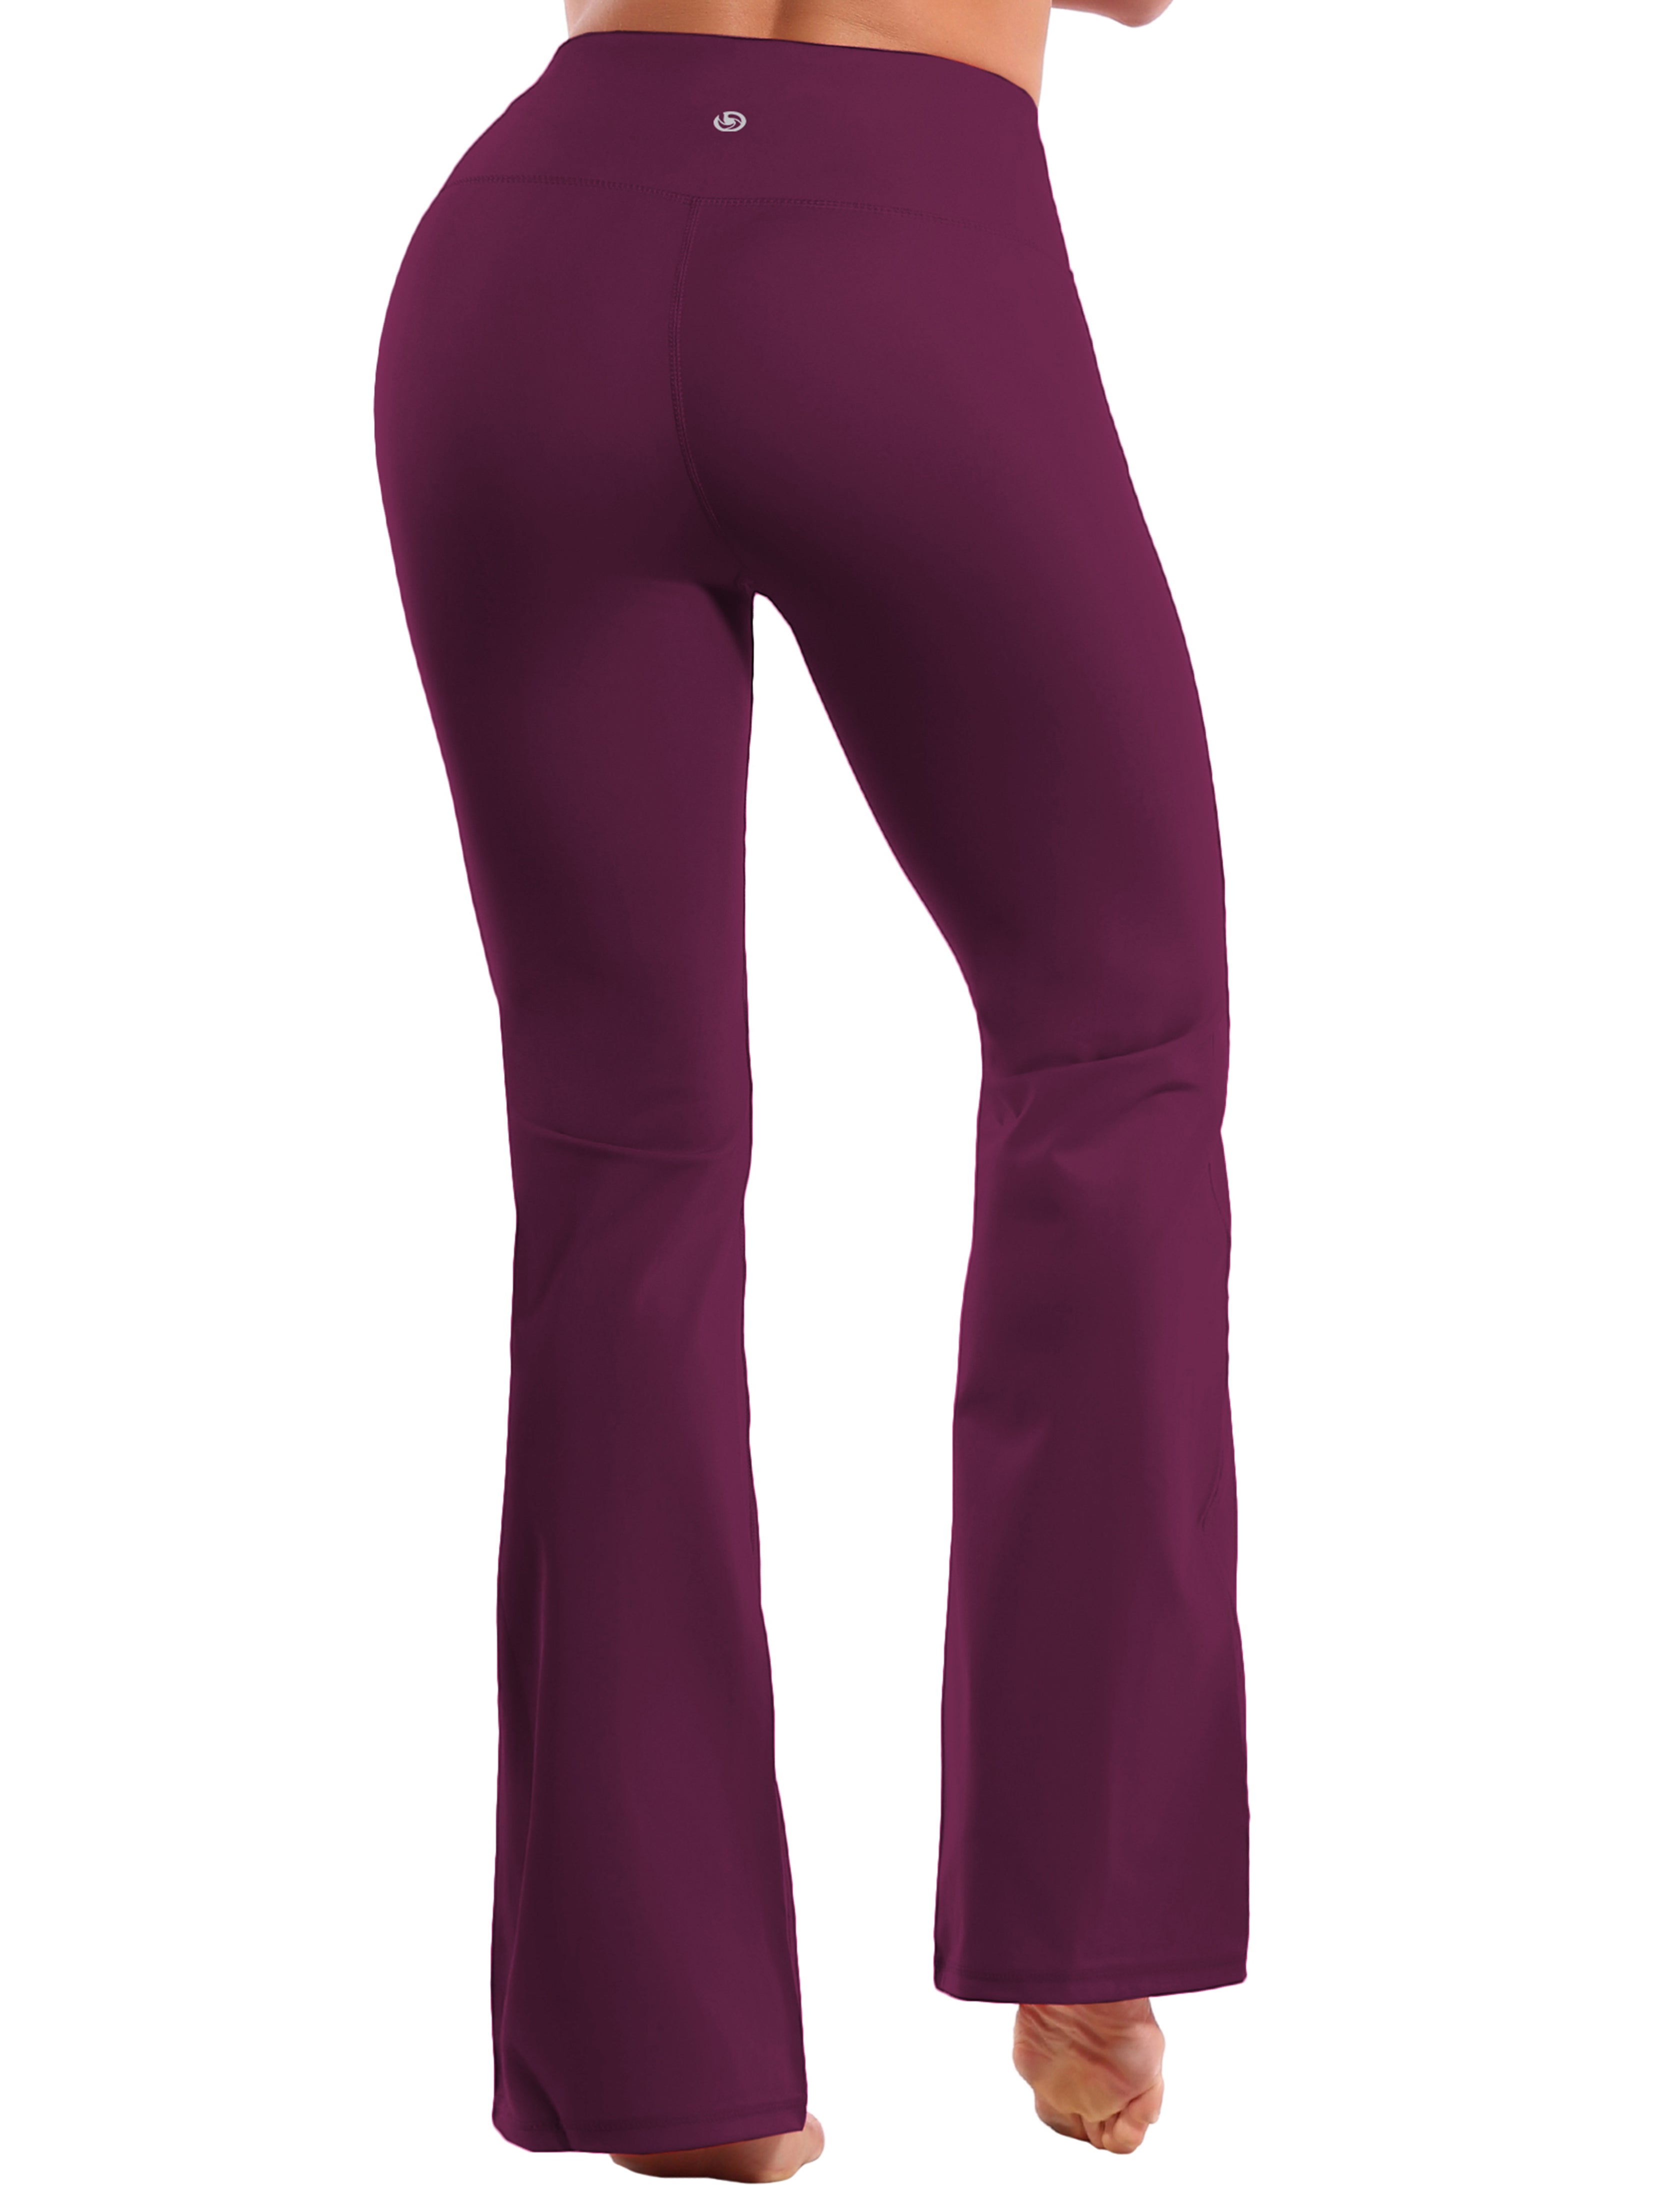 High Waist Bootcut Leggings Grapevine 75%Nylon/25%Spandex Fabric doesn't attract lint easily 4-way stretch No see-through Moisture-wicking Tummy control Inner pocket Five lengths